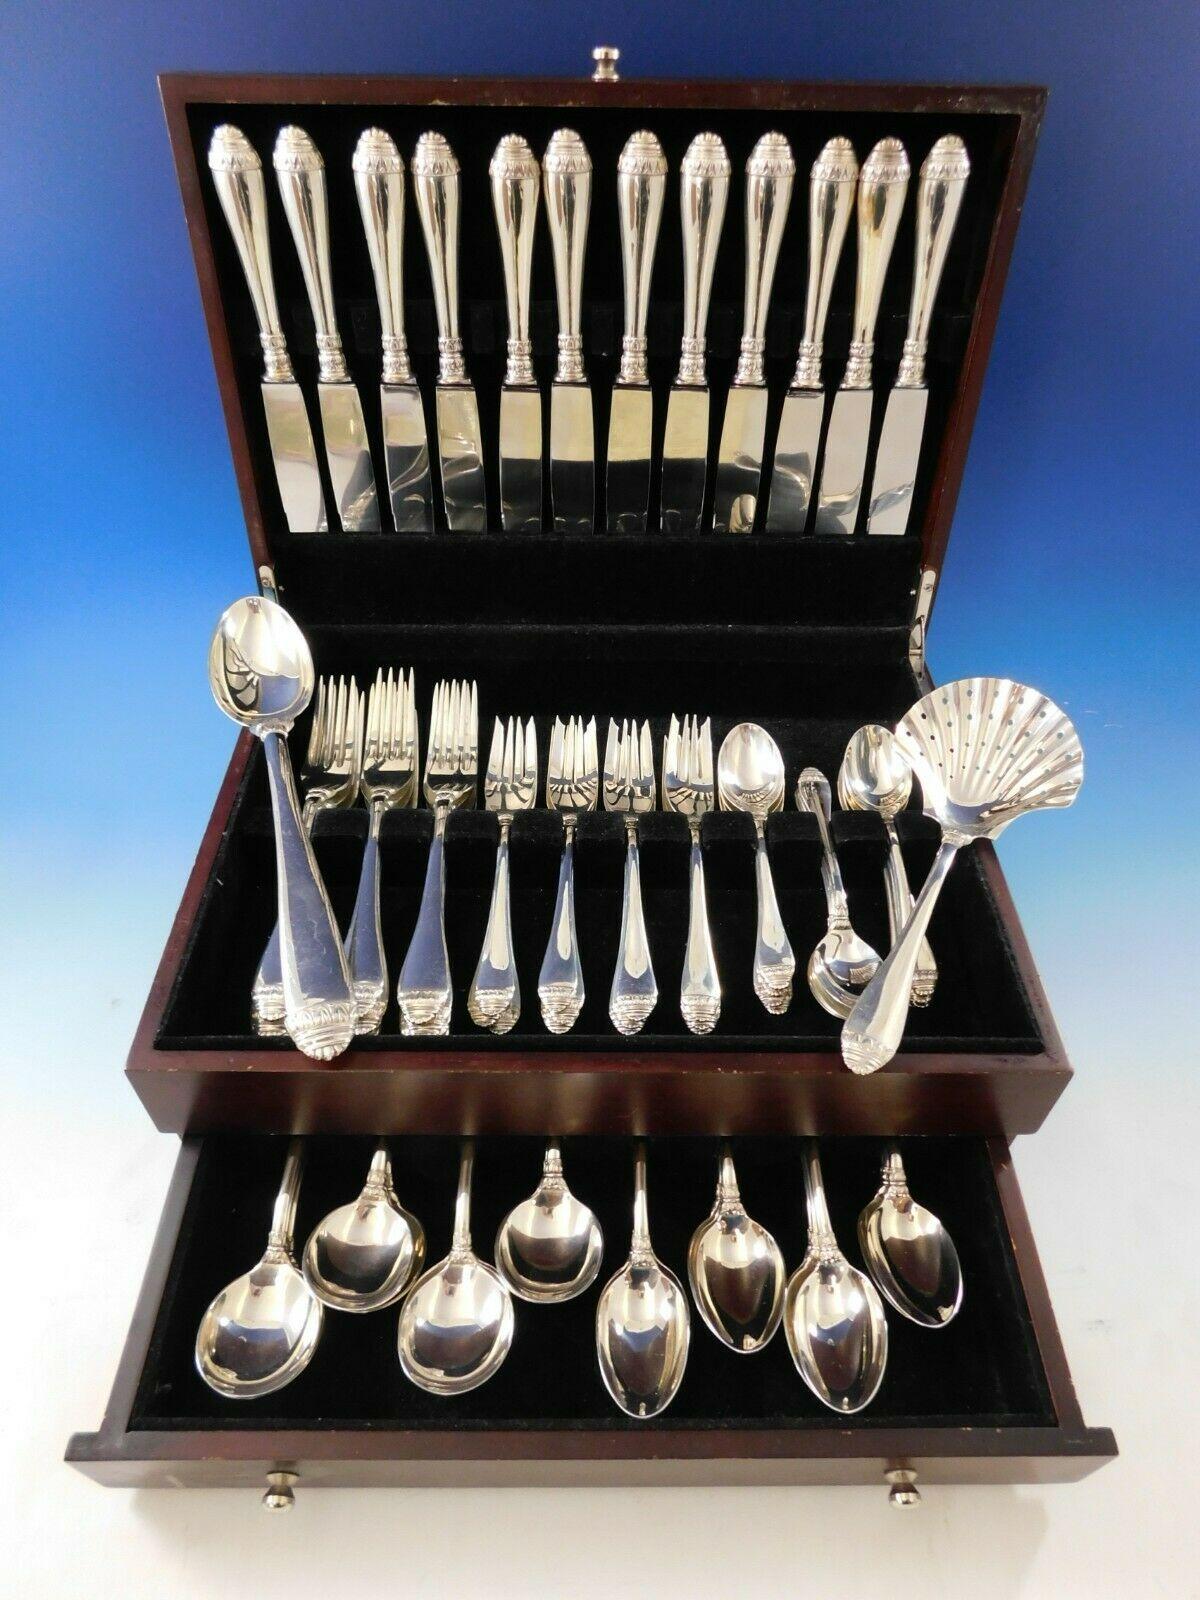 Superb French Empire by Buccellati Italy sterling silver dinner flatware set - 74 Pieces. This exceptional service is comprised of:

12 dinner knives, 10